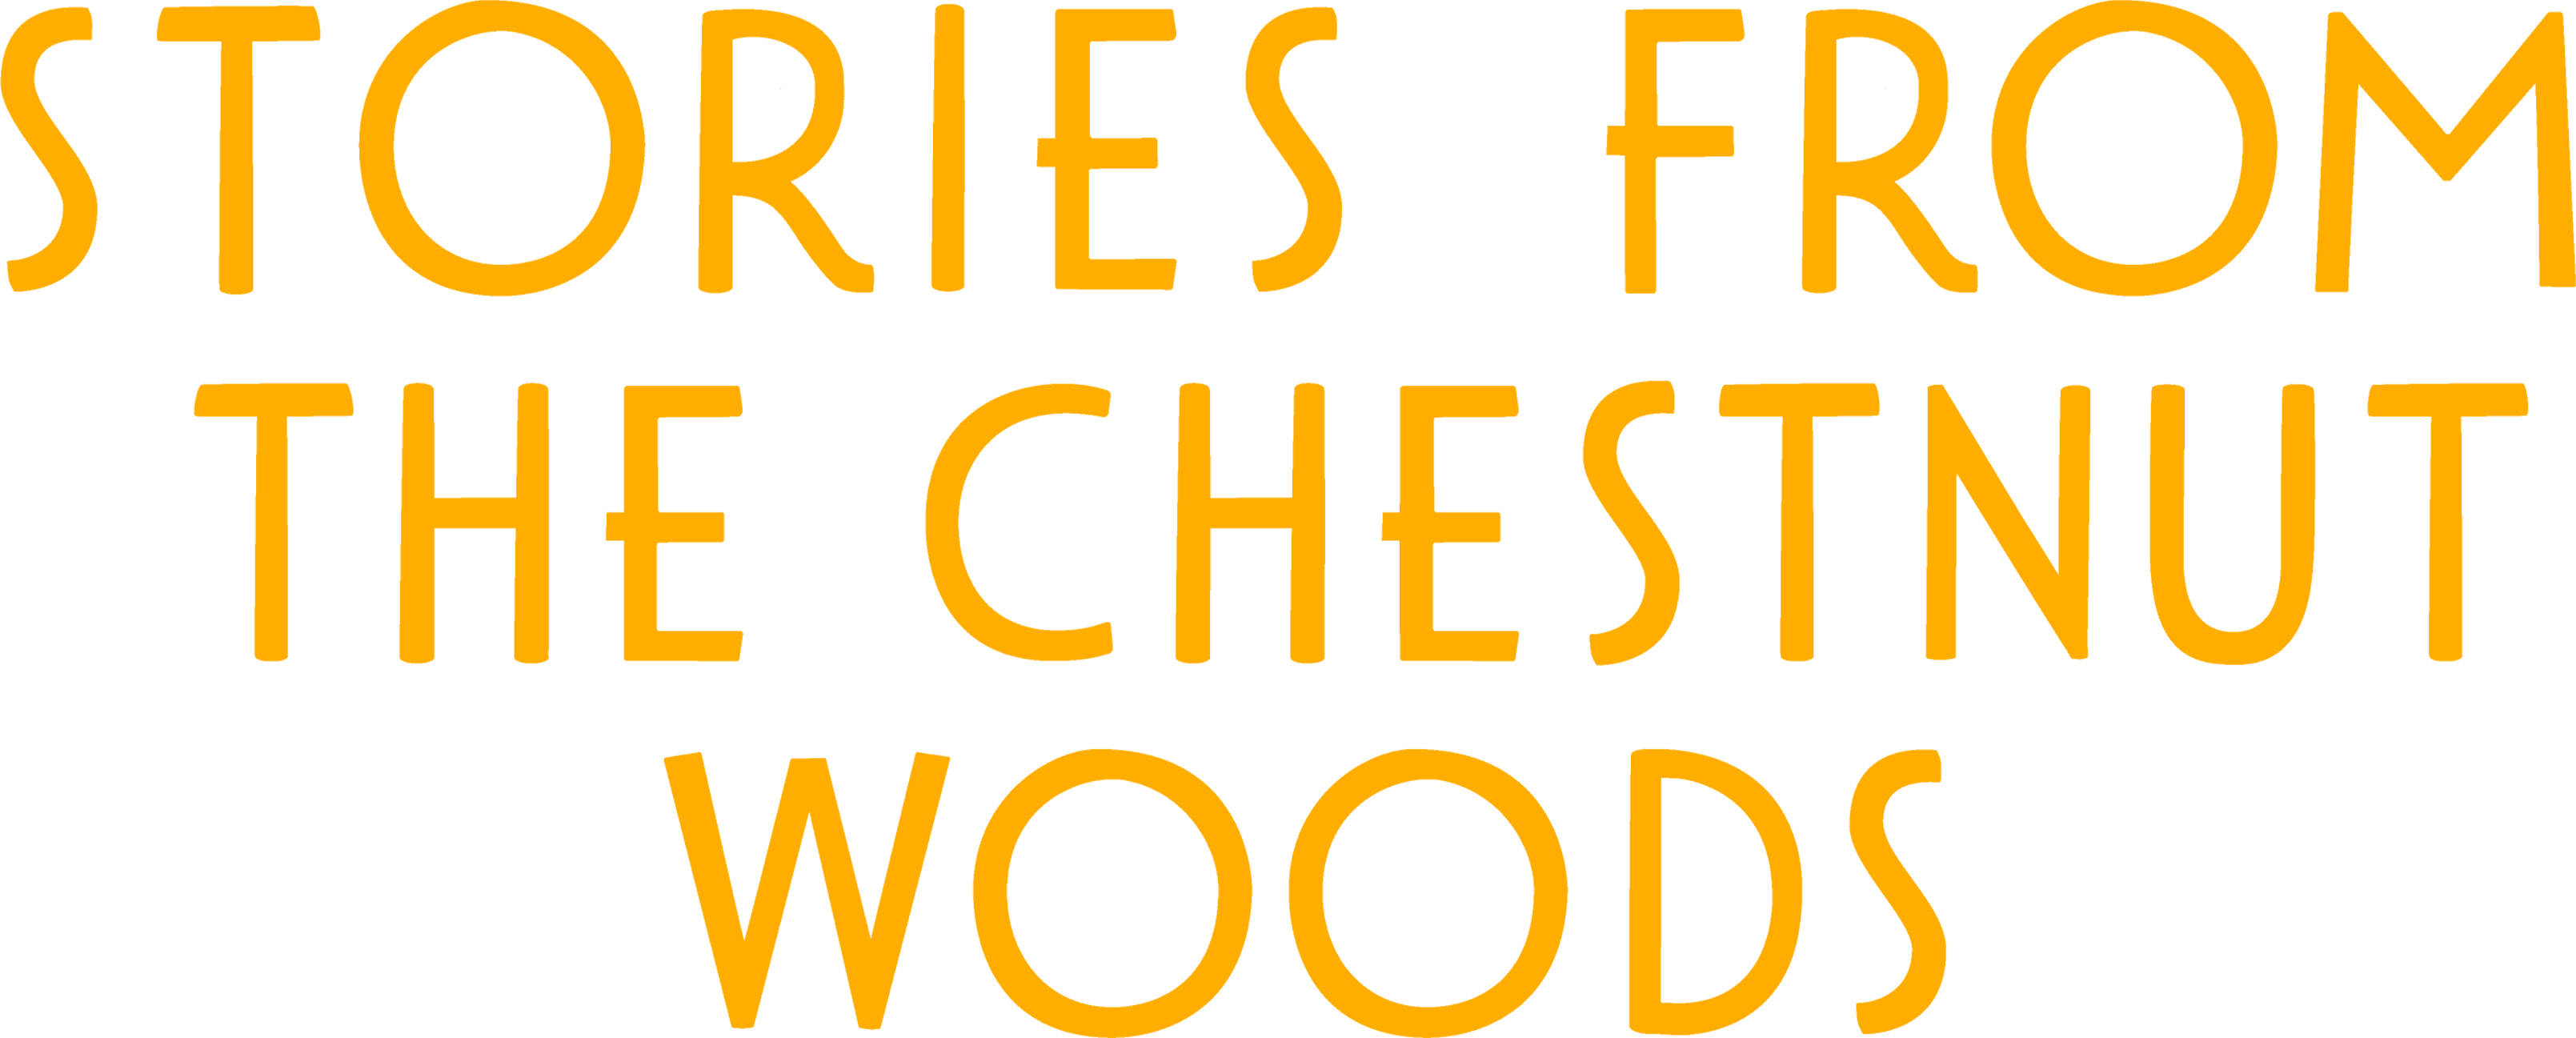 Stories from the Chestnut Woods logo